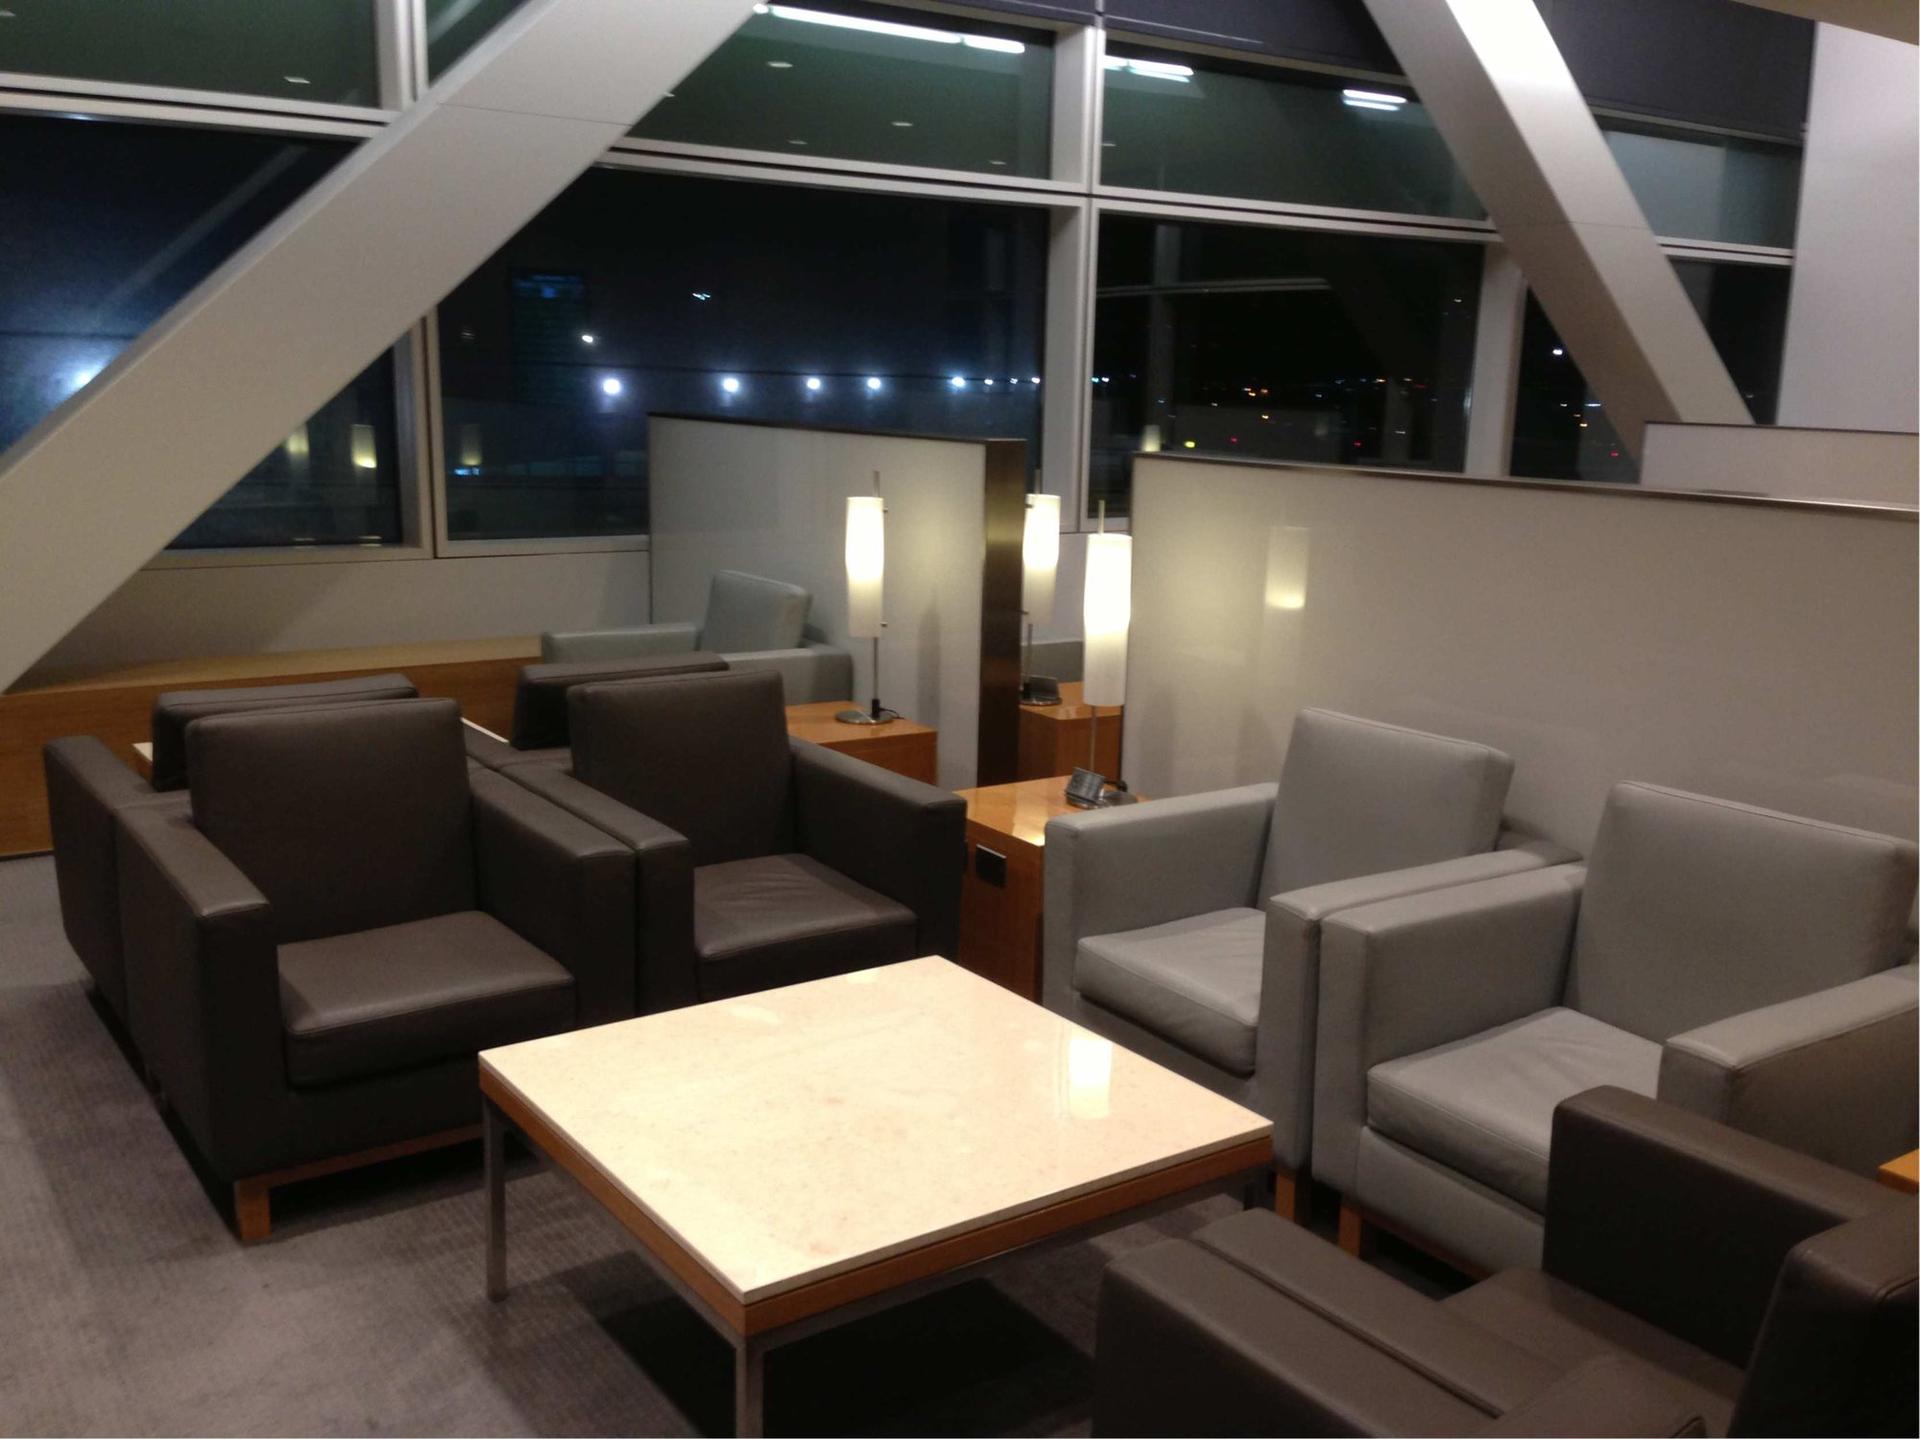 Cathay Pacific First and Business Class Lounge image 6 of 74